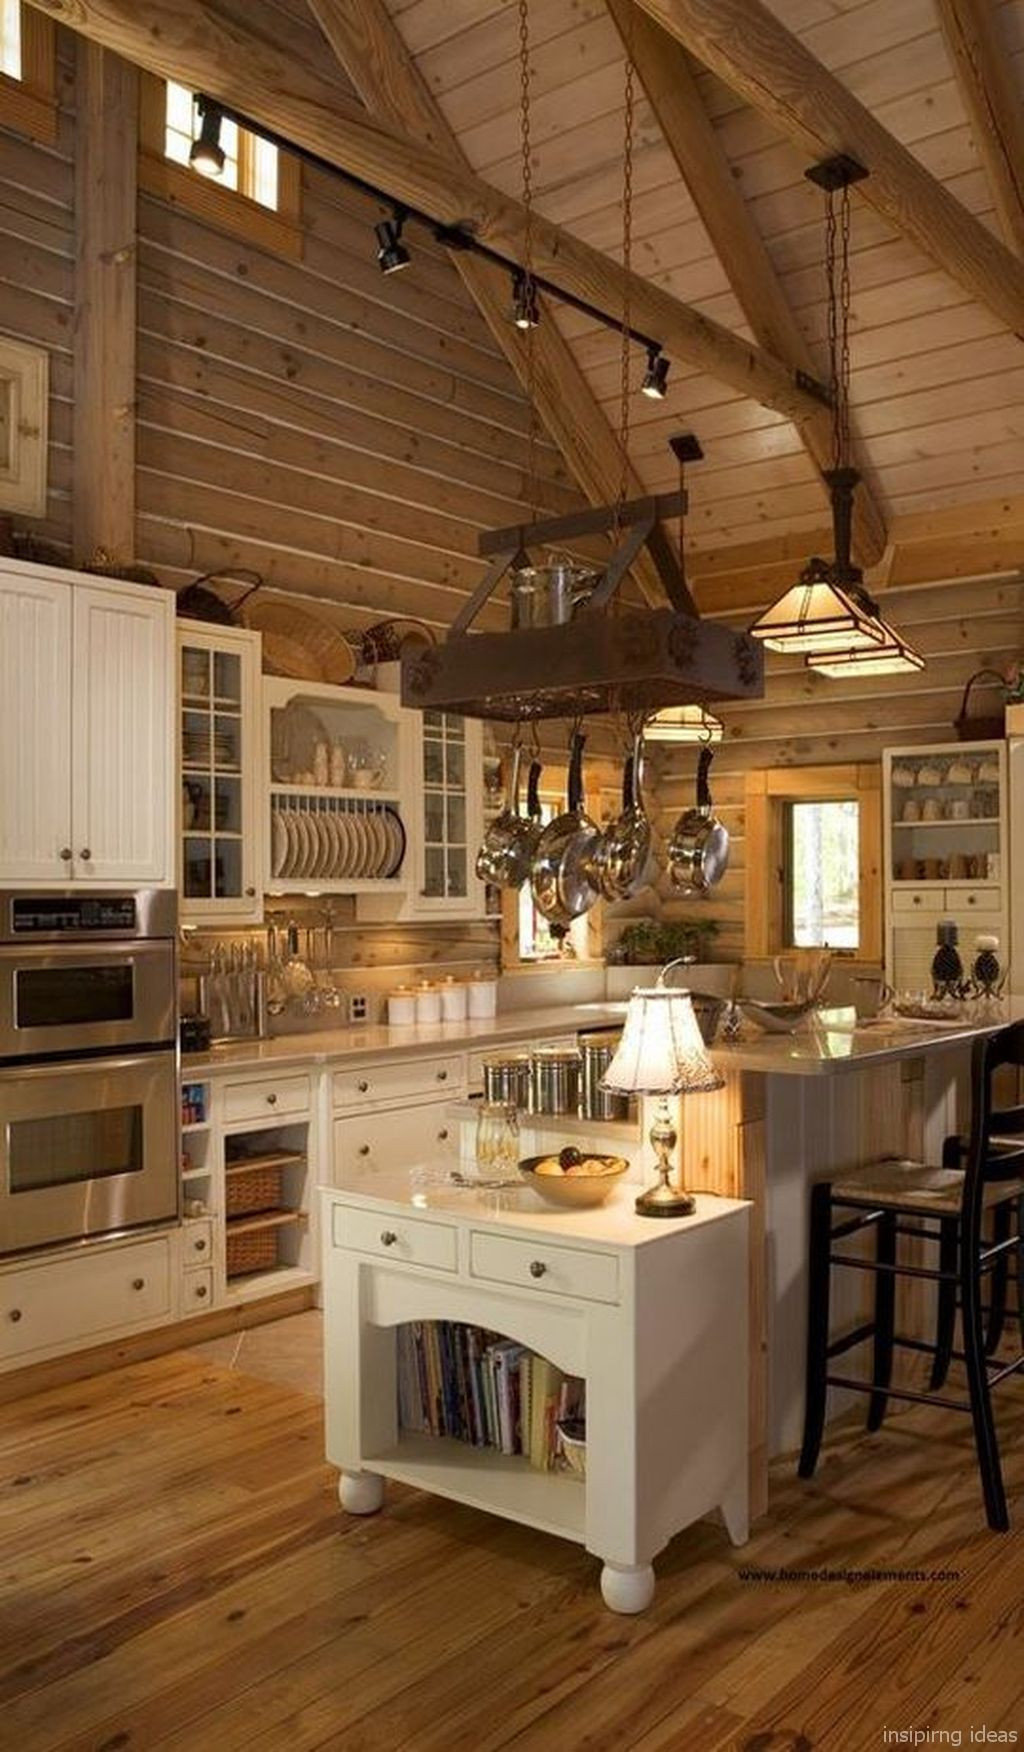 Rustic Log Cabin Kitchens
 054 Small Log Cabin Homes Ideas